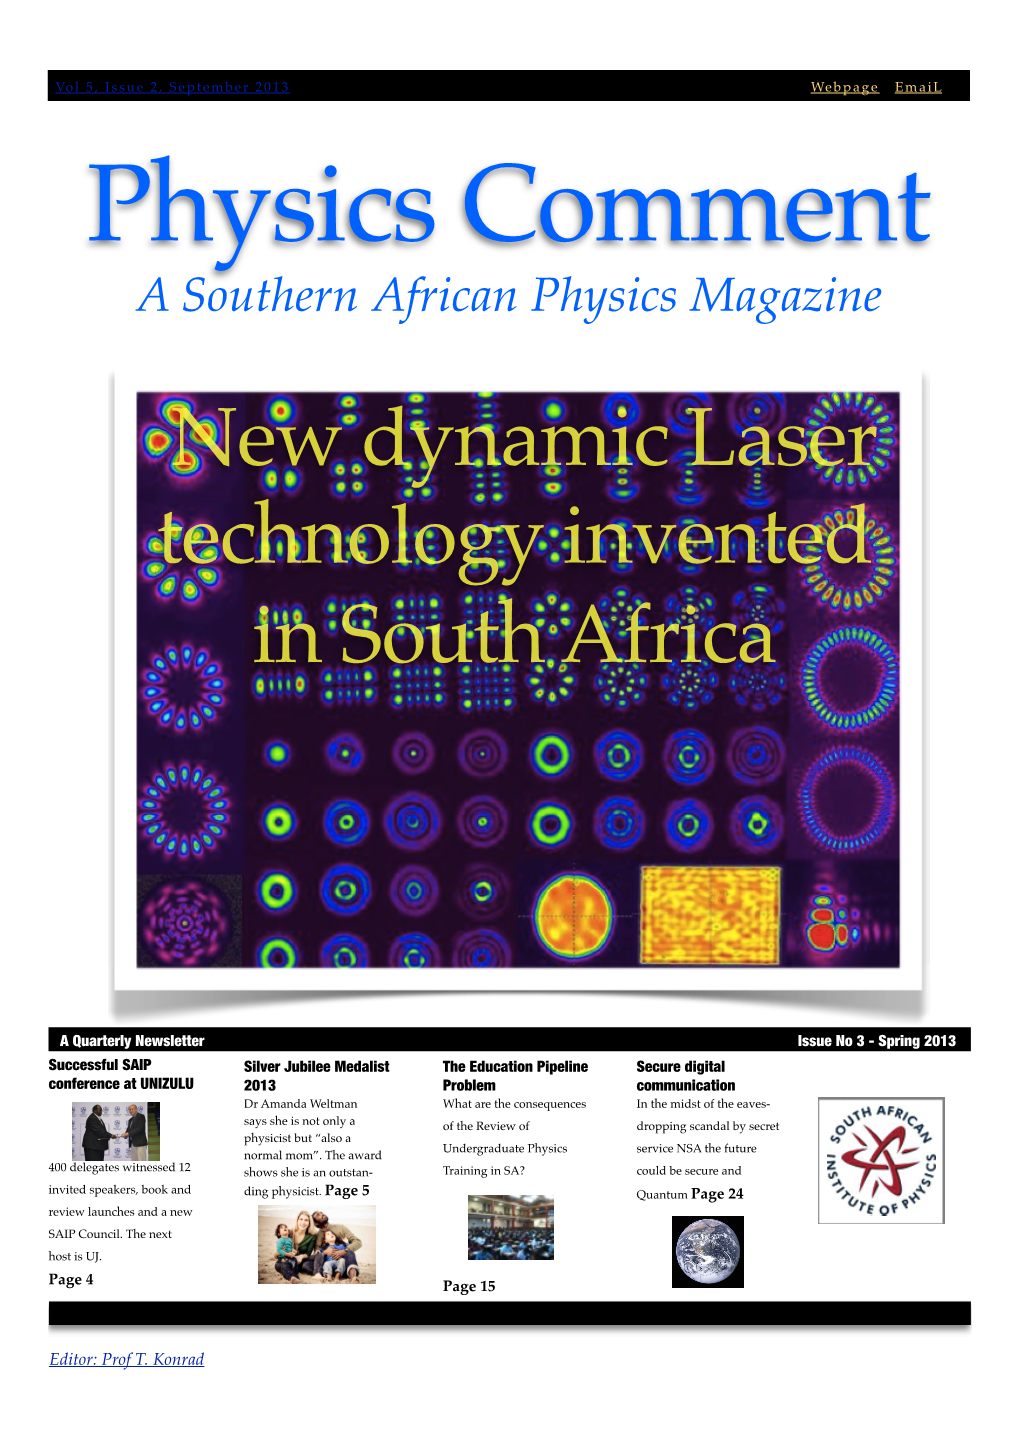 Physics Comment a Southern African Physics Magazine